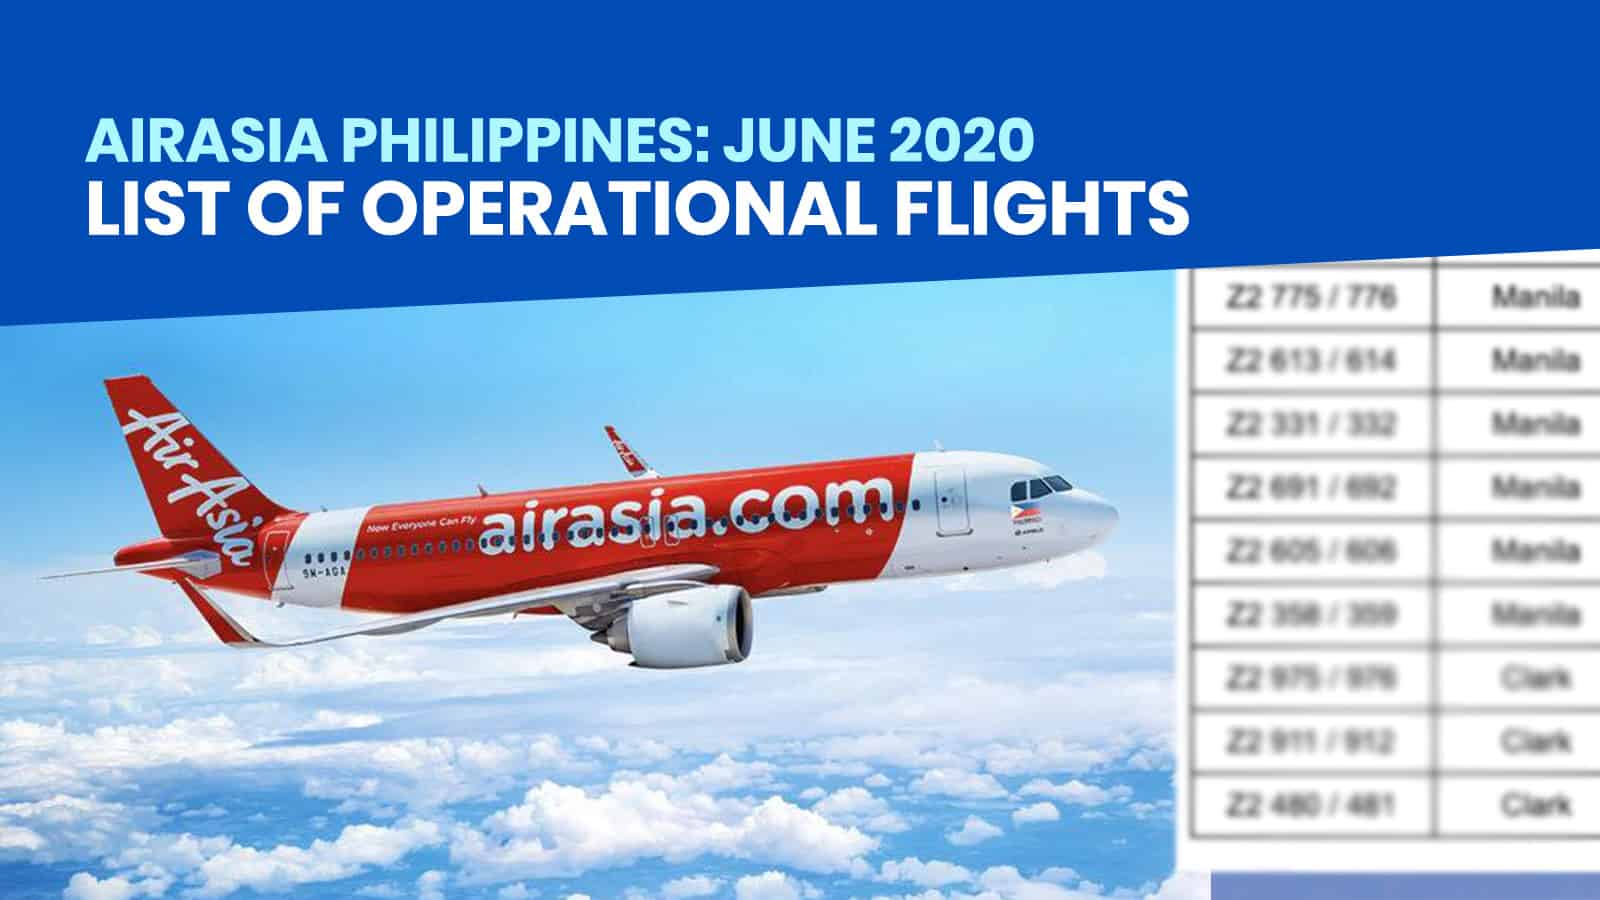 AIRASIA PHILIPPINES: List of Operational Flights for June 2020